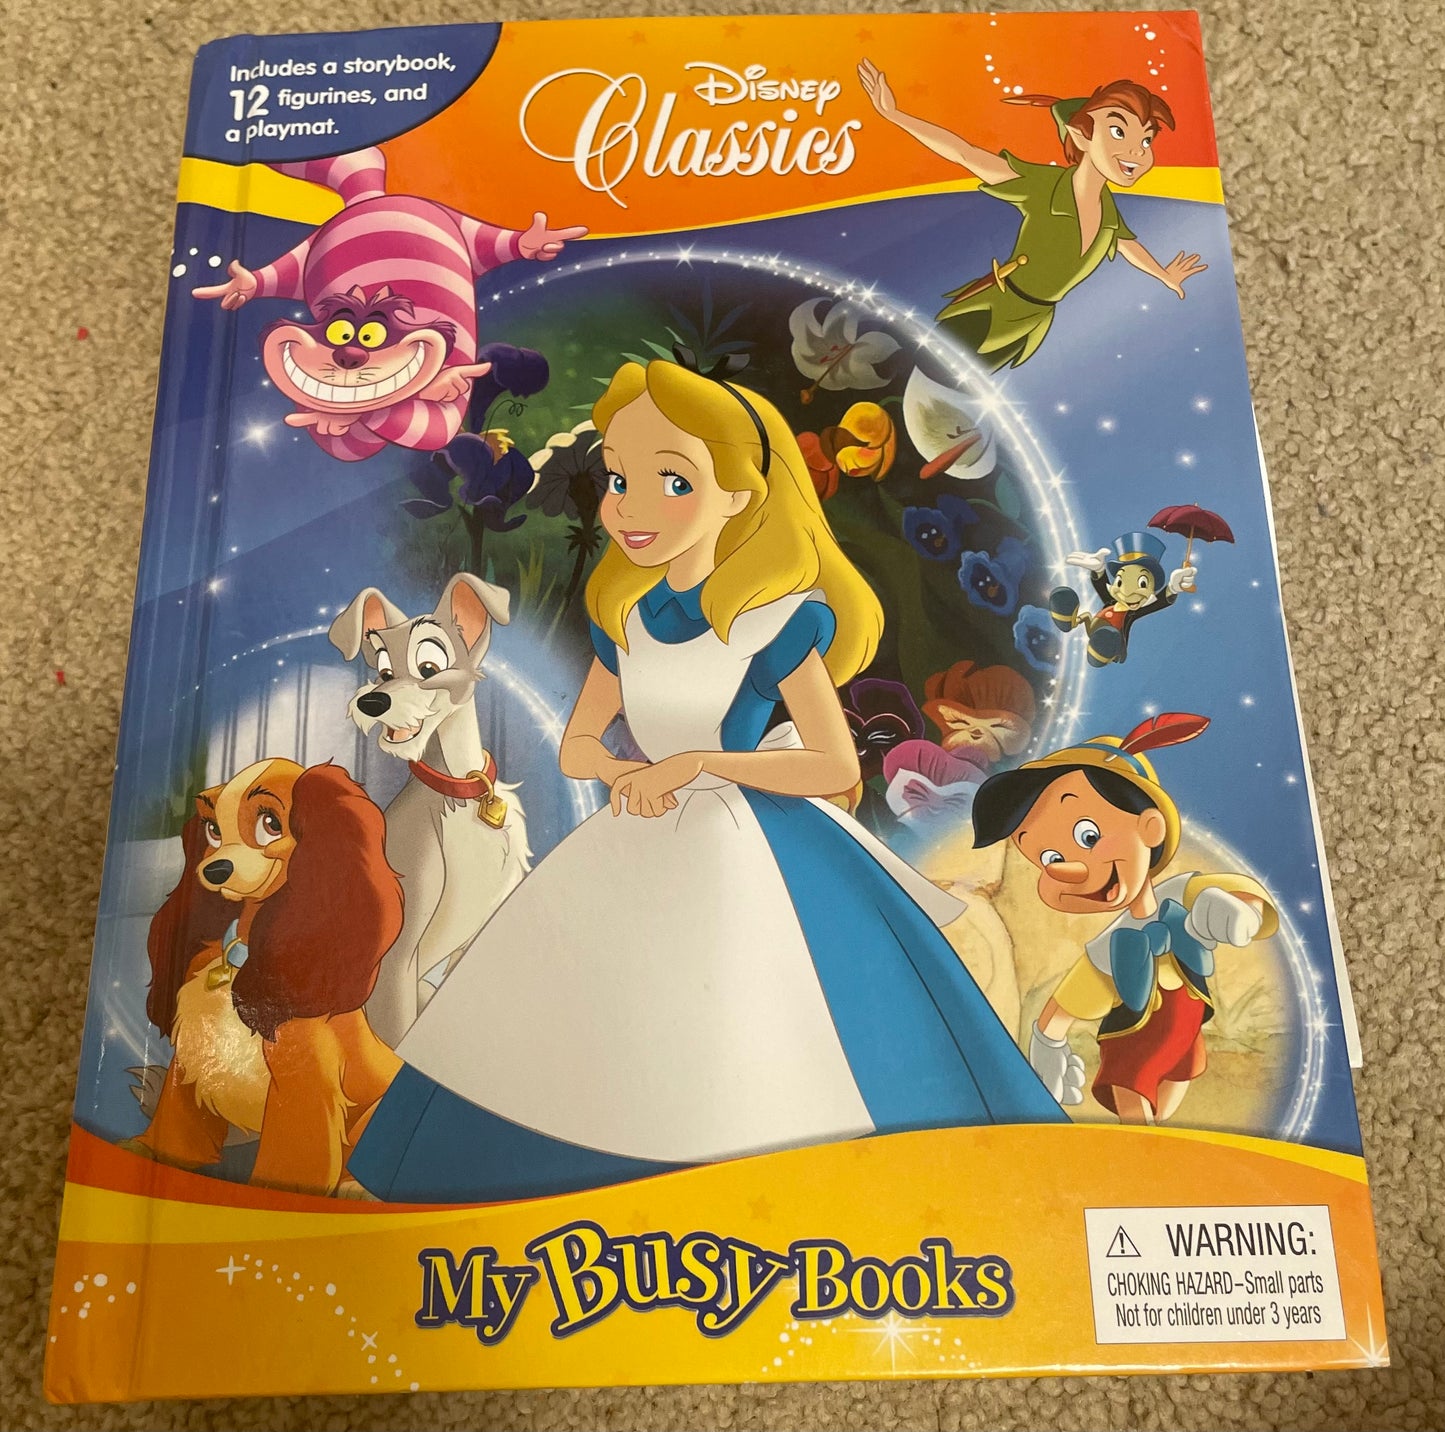 Disney busy book with characters